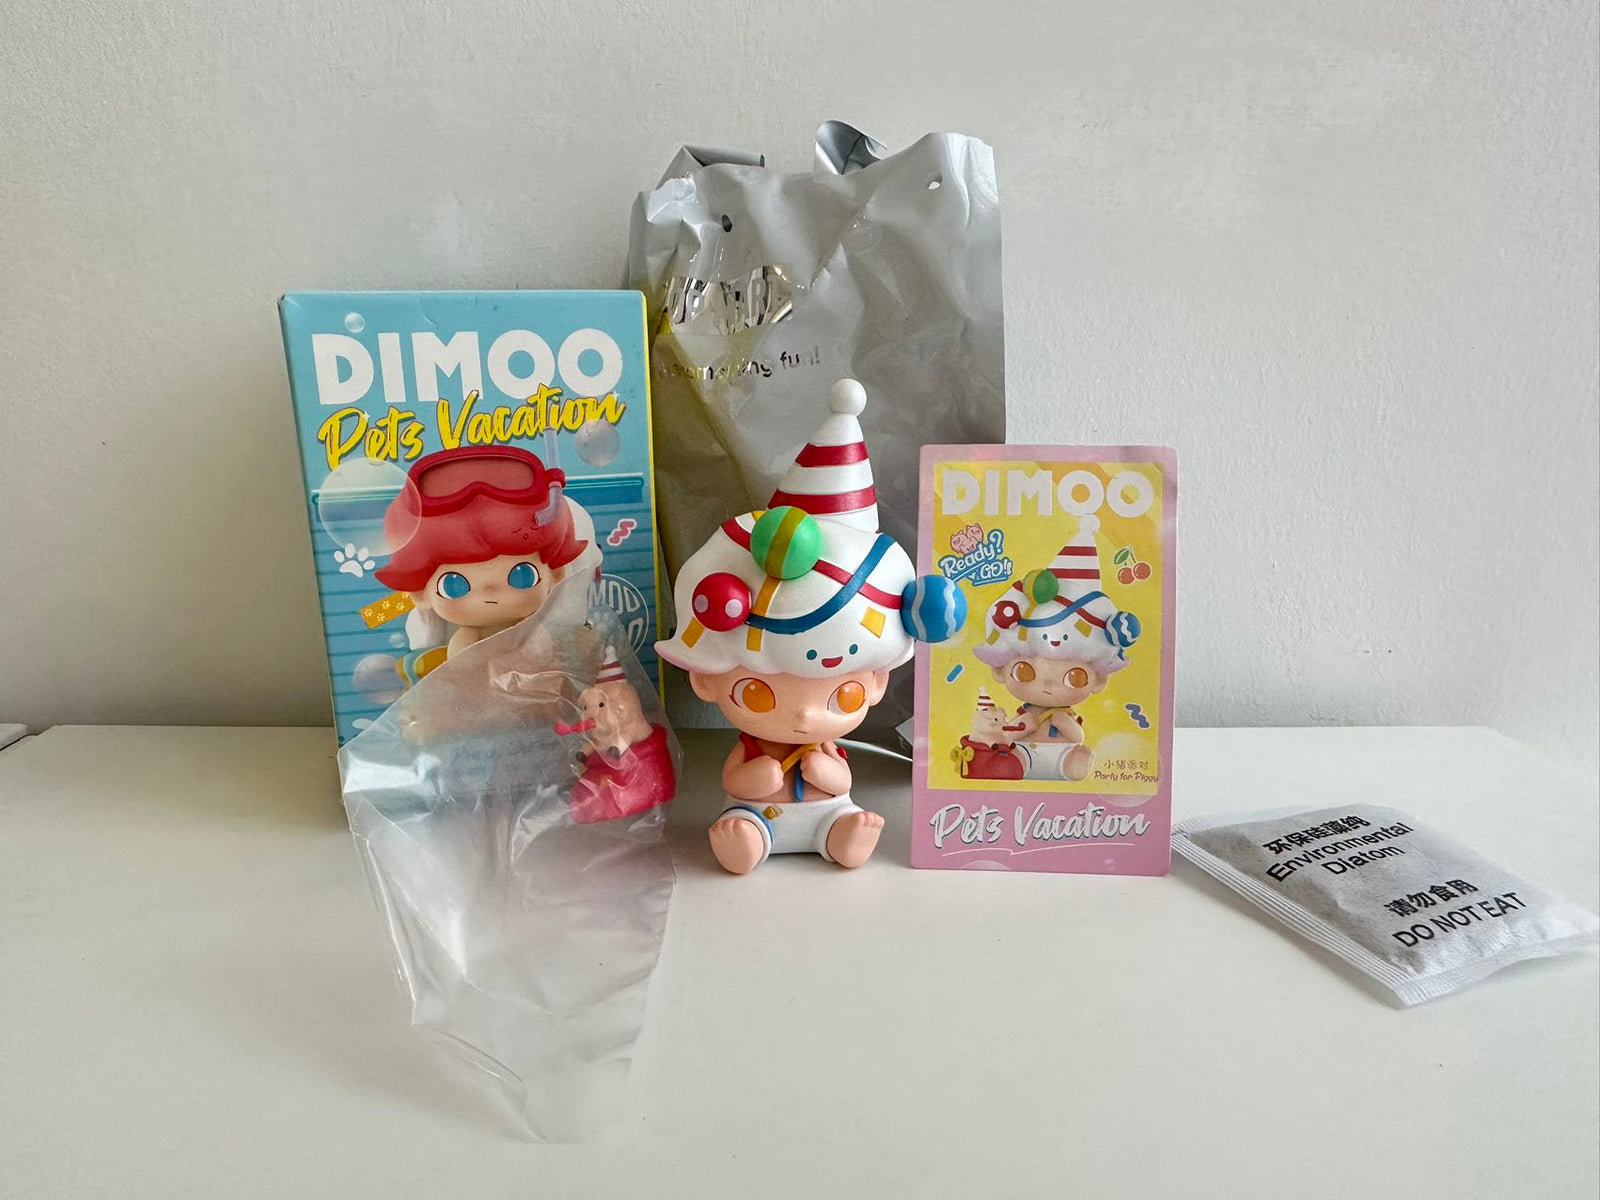 Party for piggy - Dimoo Pets Vacation Blind Box Series by POP MART - 1